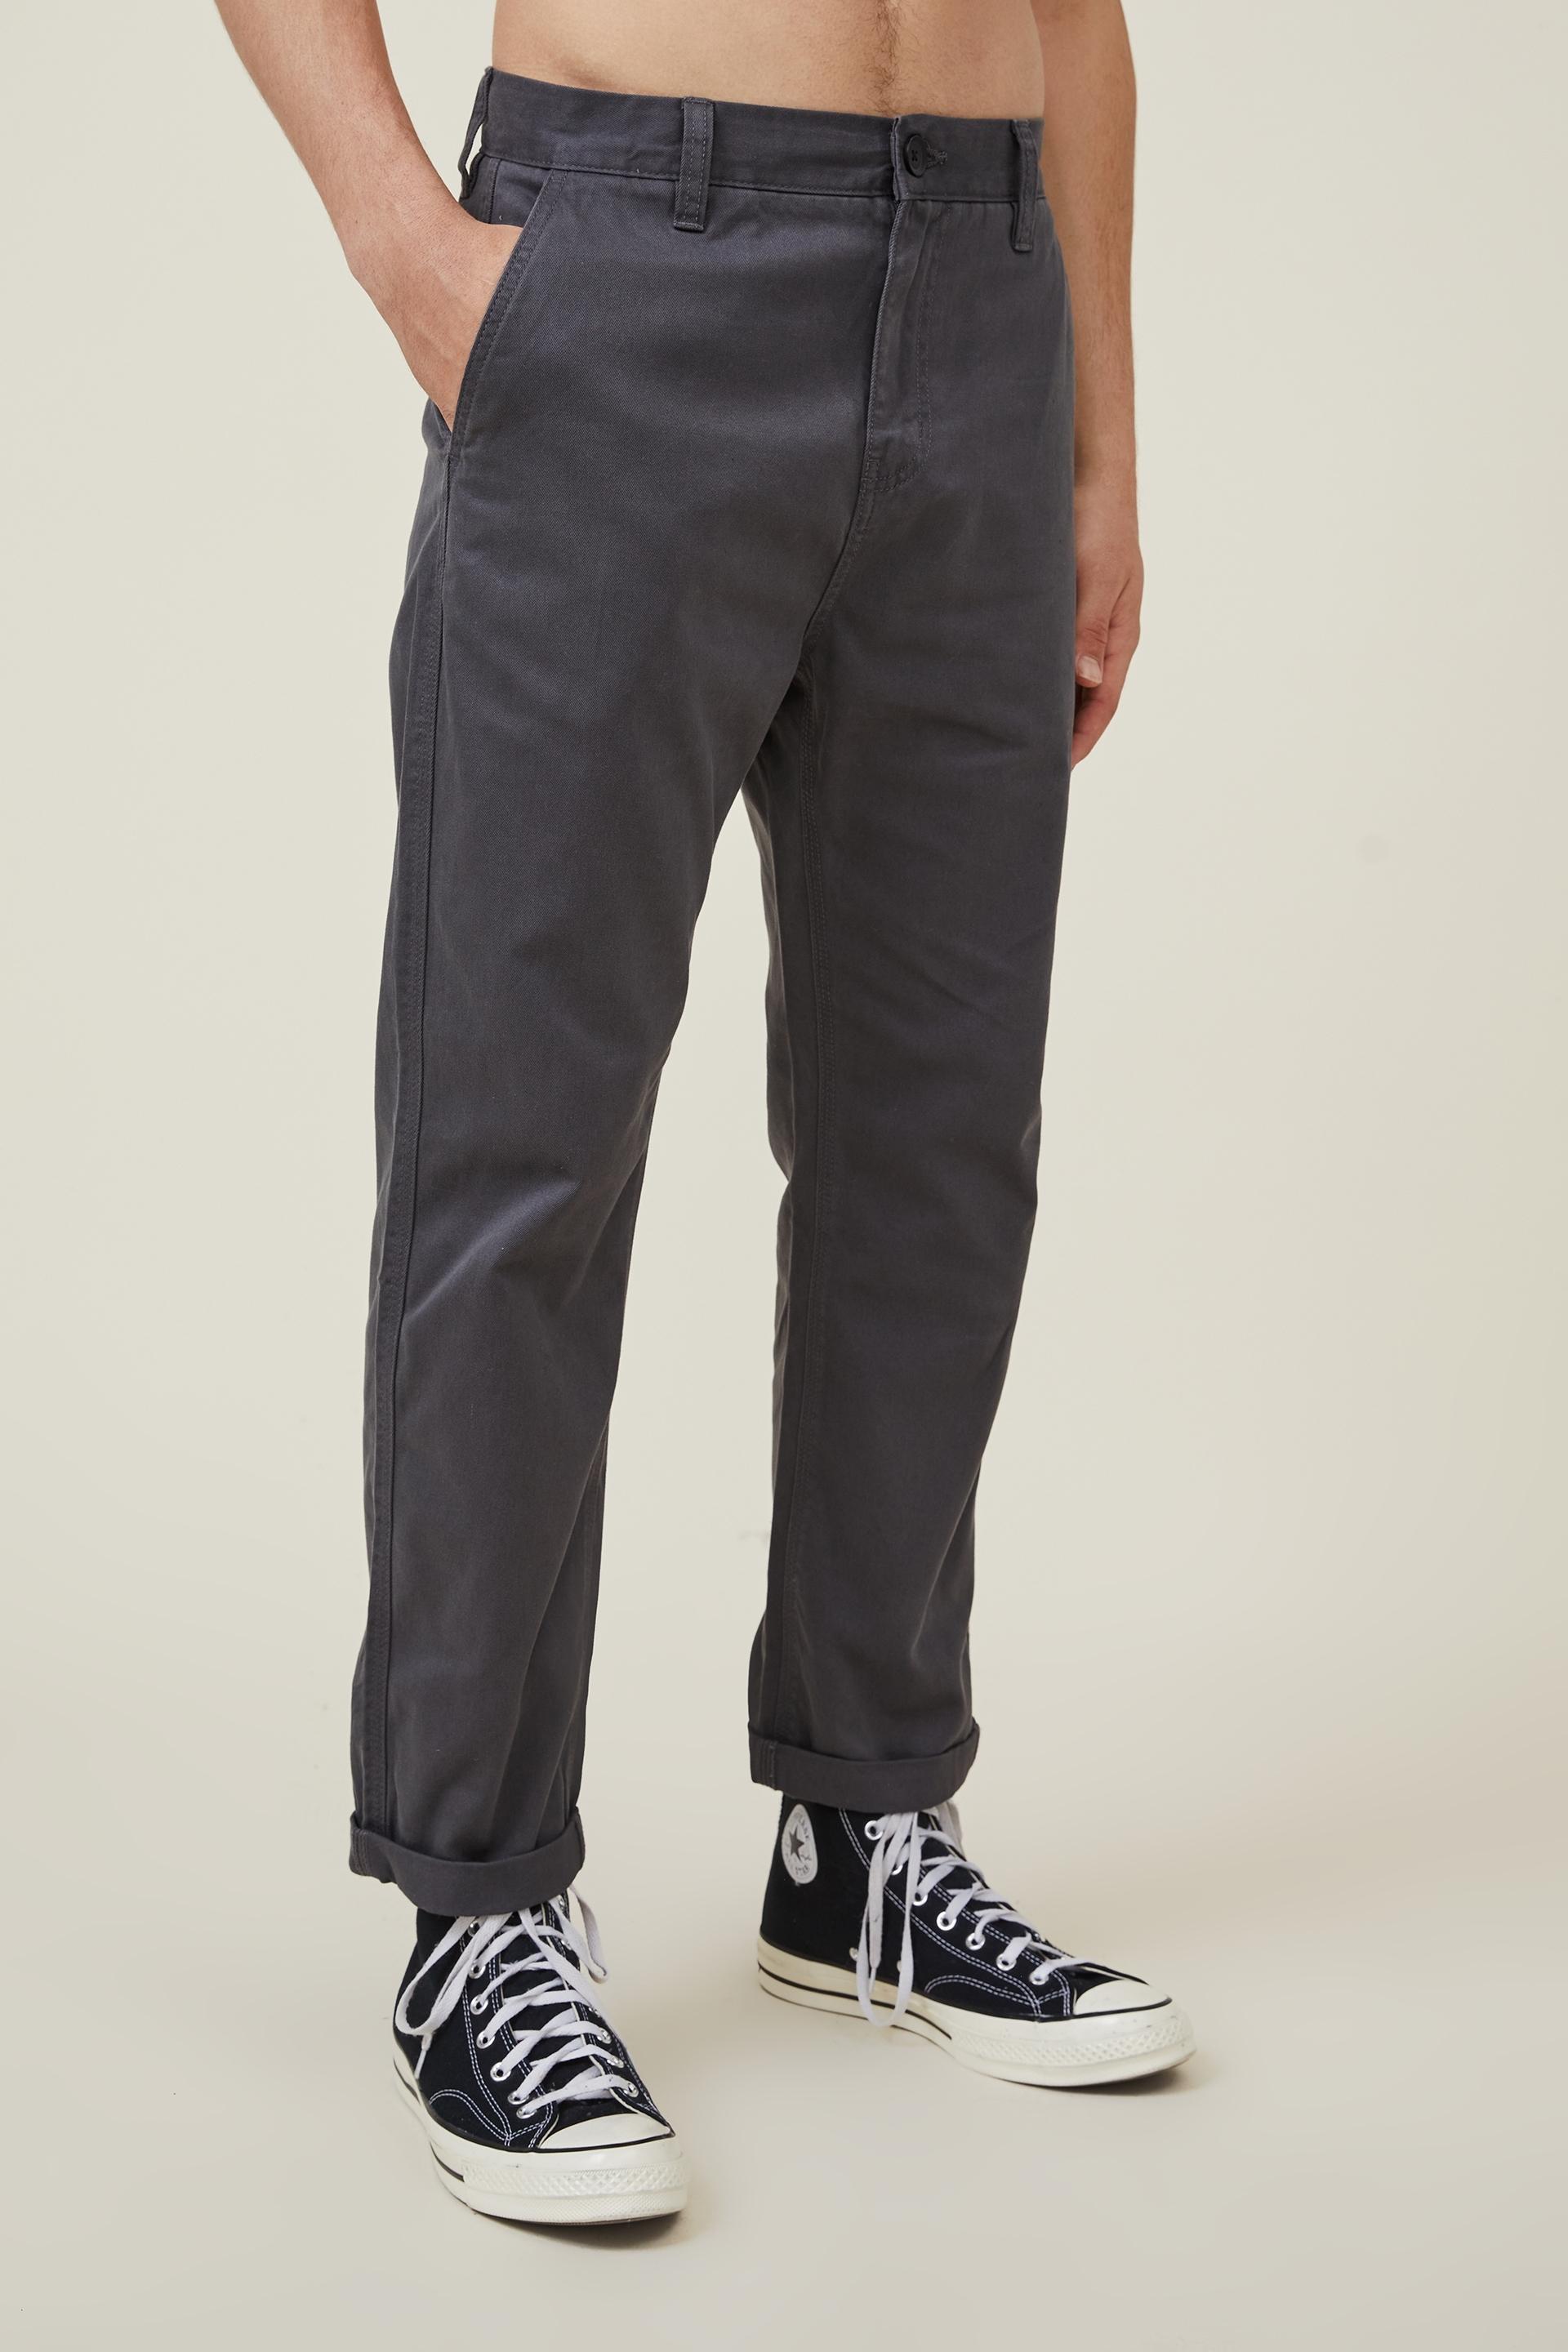 Relaxed chino - washed slate Cotton On Pants & Chinos | Superbalist.com